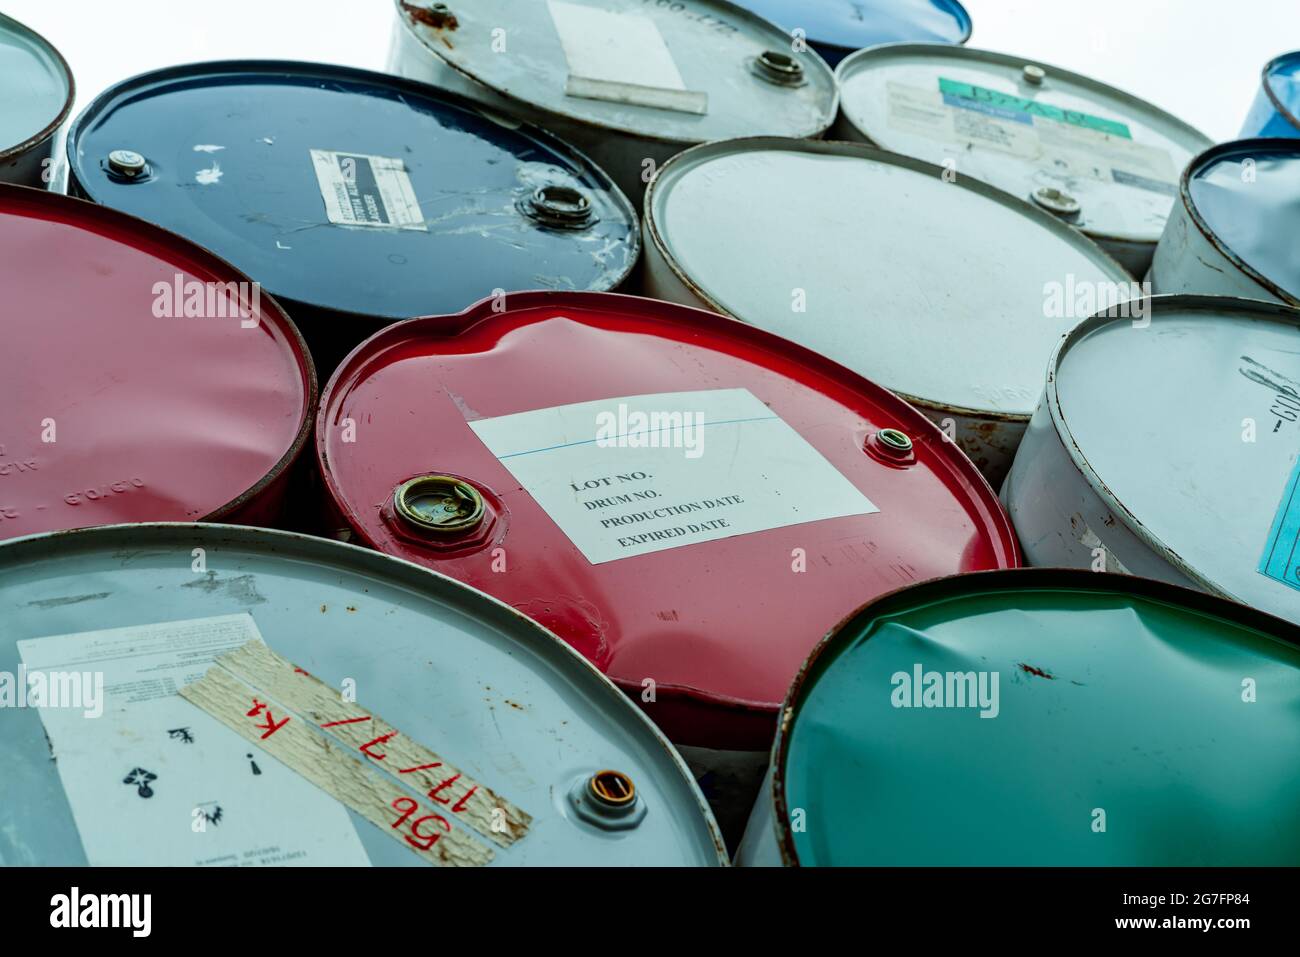 Old chemical barrels stack. Red, green, and blue chemical drum. Steel tank of flammable liquid. Hazard chemical barrel. Industrial waste. Stock Photo